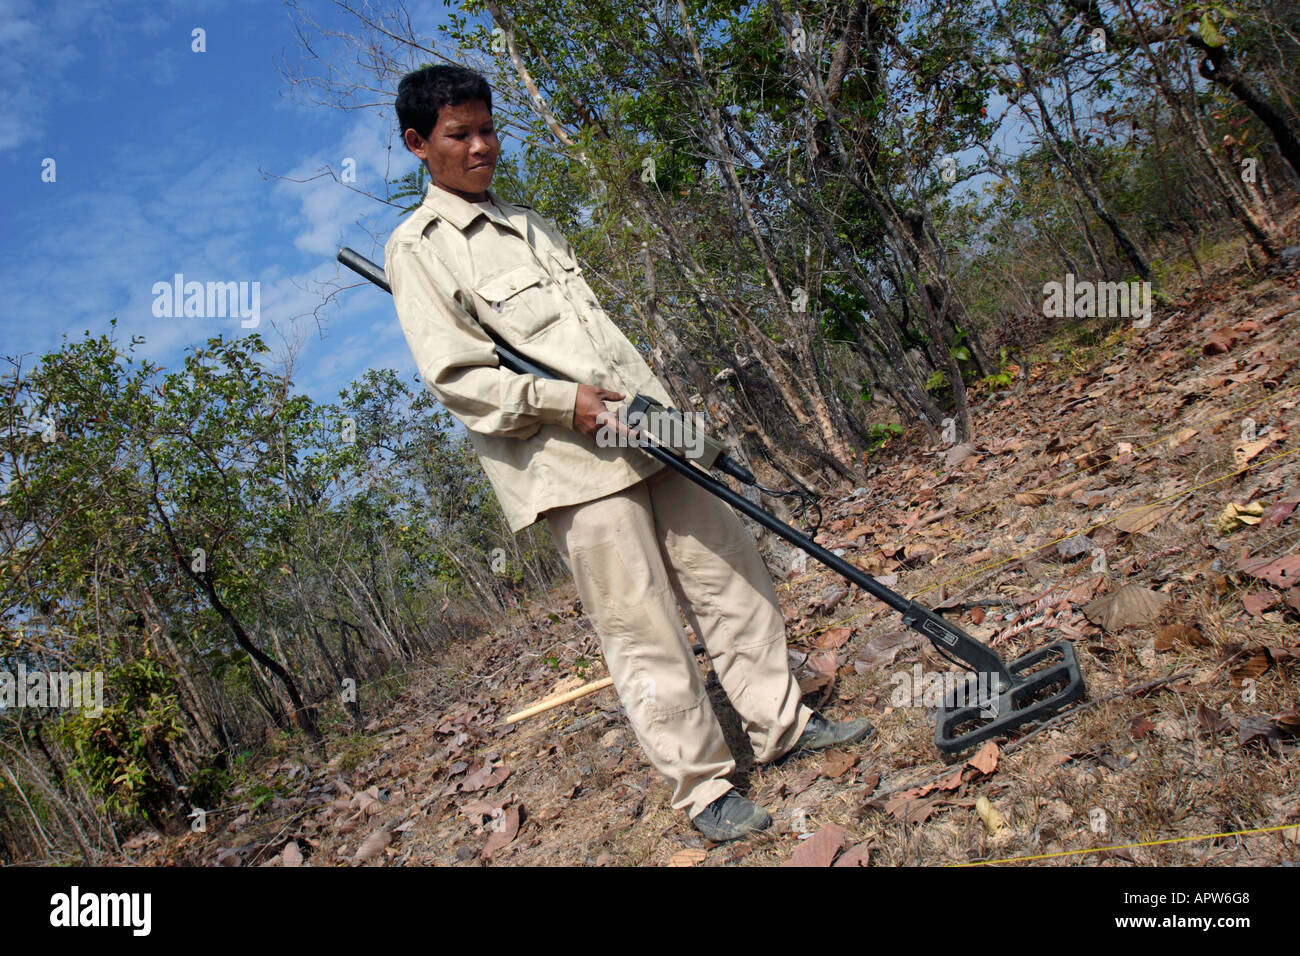 Member of UXO Lao, a government de-mining group clears an area of unexploded ordnance in Saravan, southern Laos. Stock Photo